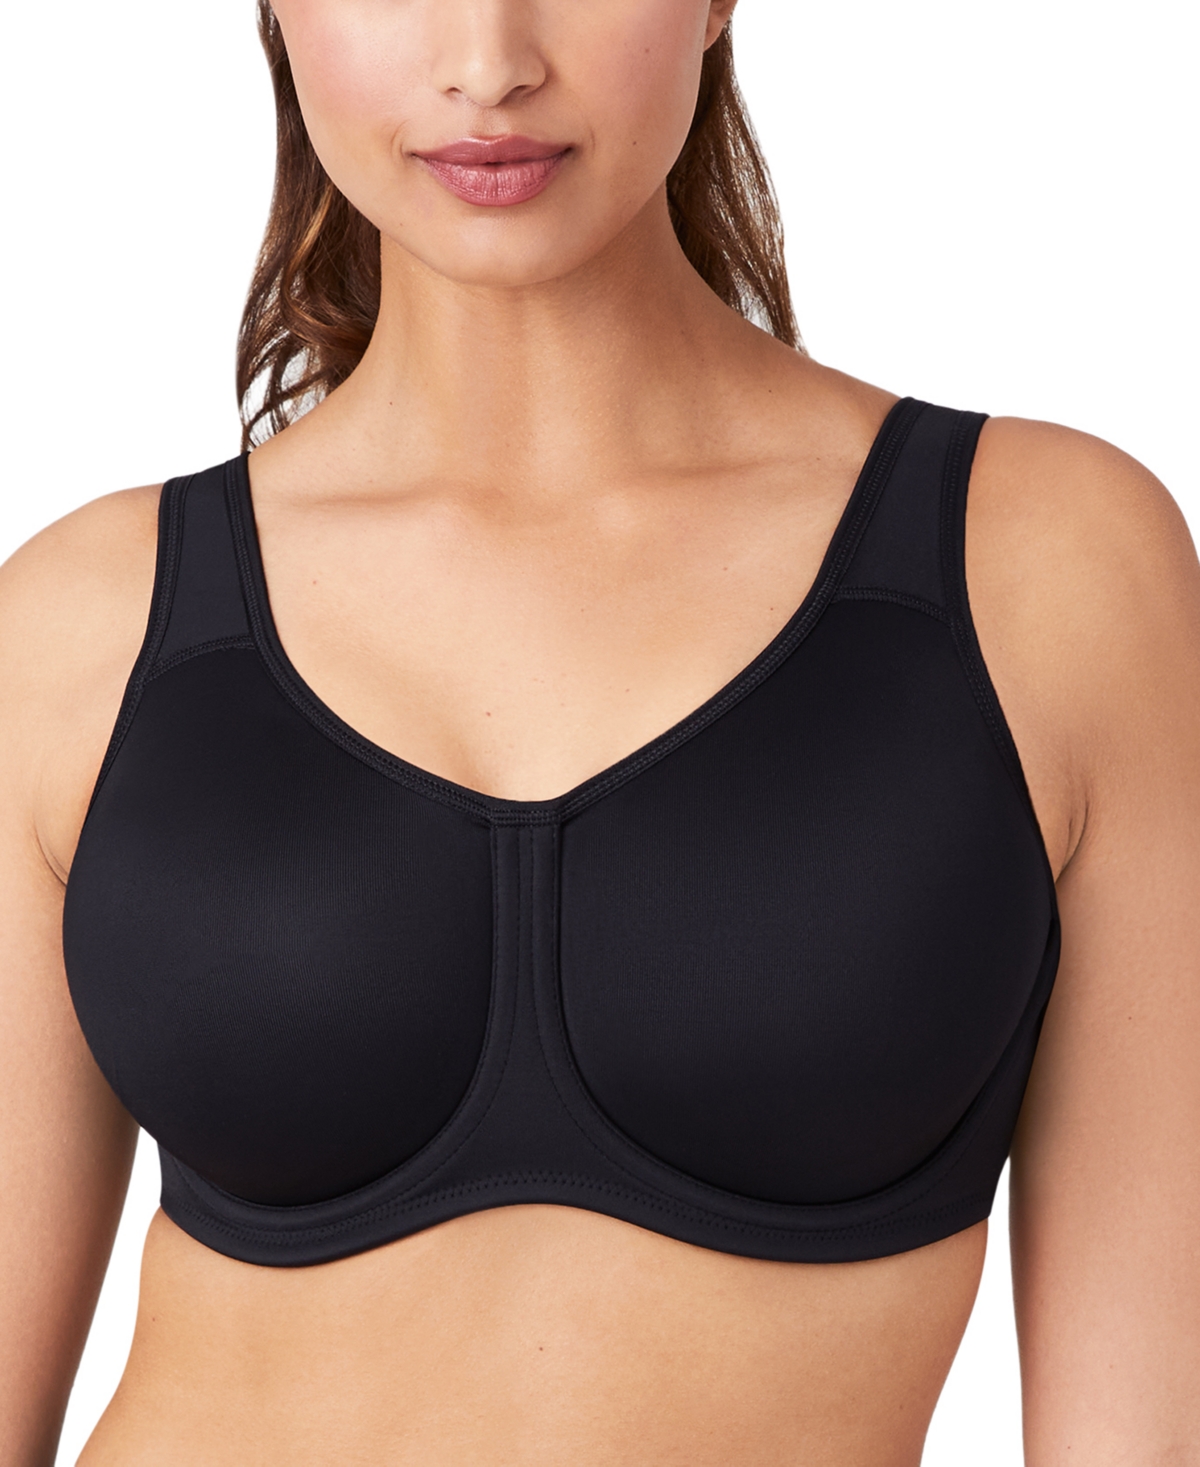 UPC 012214852801 product image for Wacoal Sport High-Impact Underwire Bra 855170, Up To I Cup | upcitemdb.com